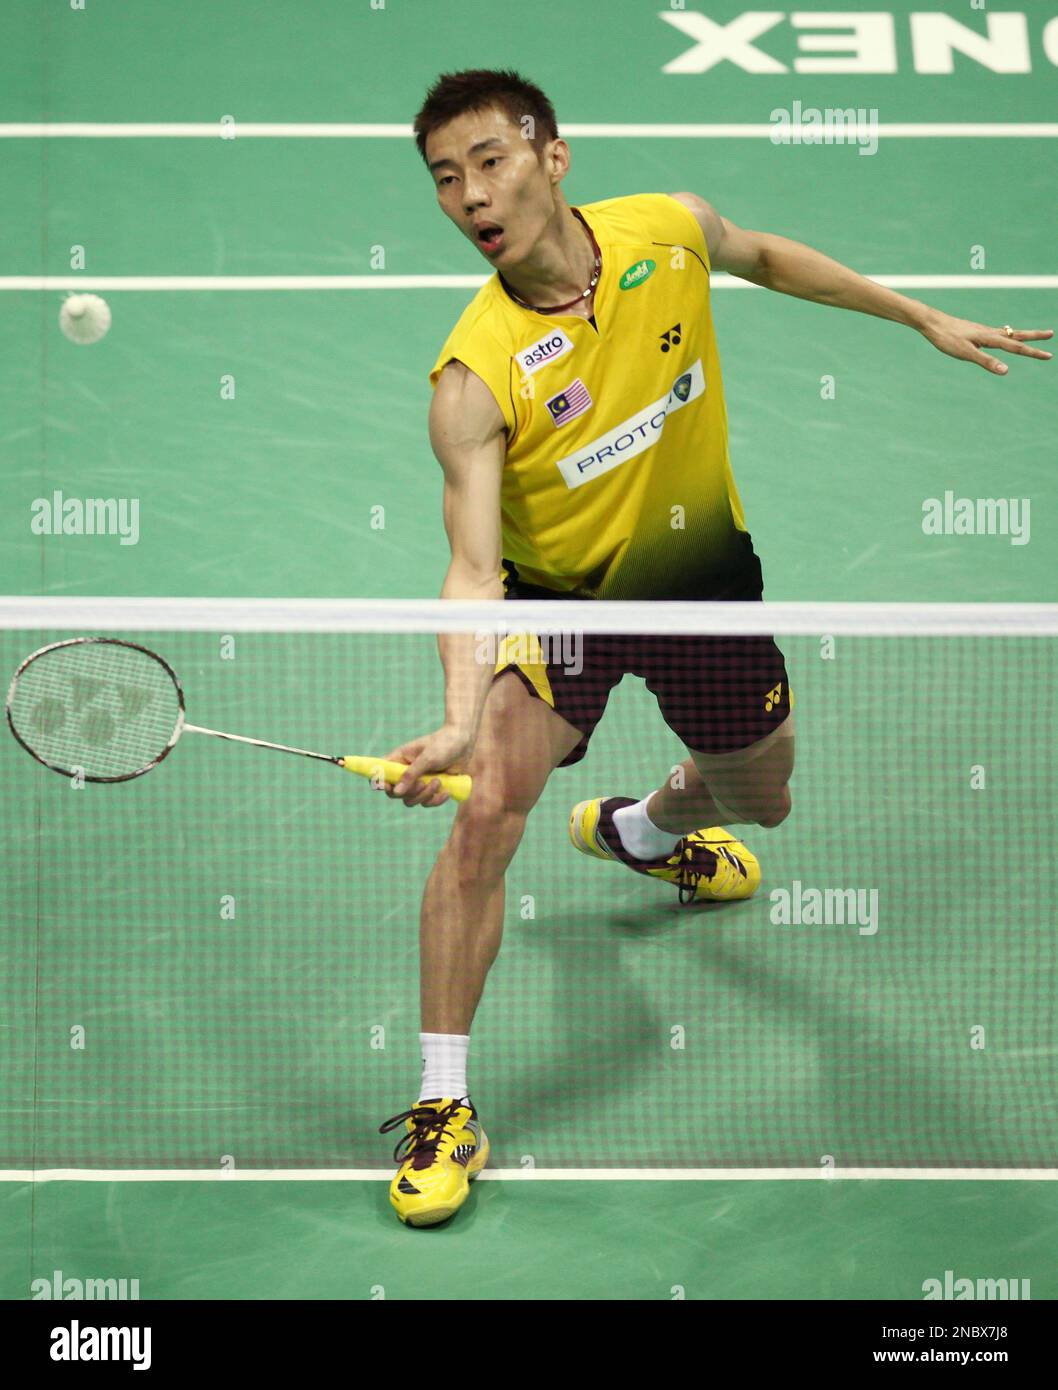 World No.1 Lee Chong Wei of Malaysia plays against Denmarks Peter Gade in the mens singles final of the India Open Super Series badminton in New Delhi, India, Sunday, May 1, 2011.